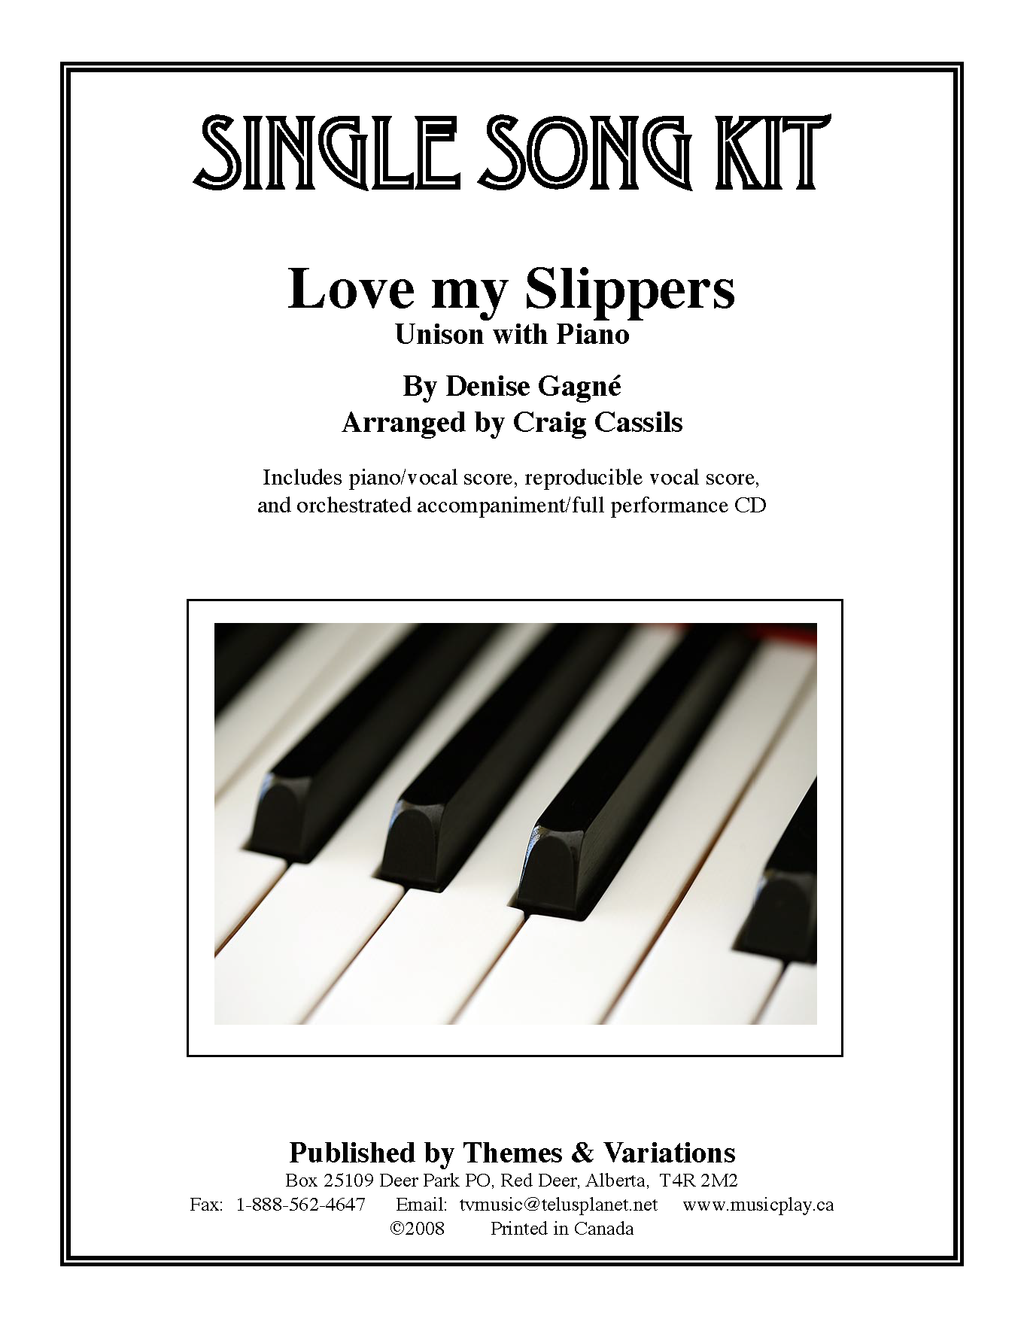 Love my Slippers Single Song Kit Download